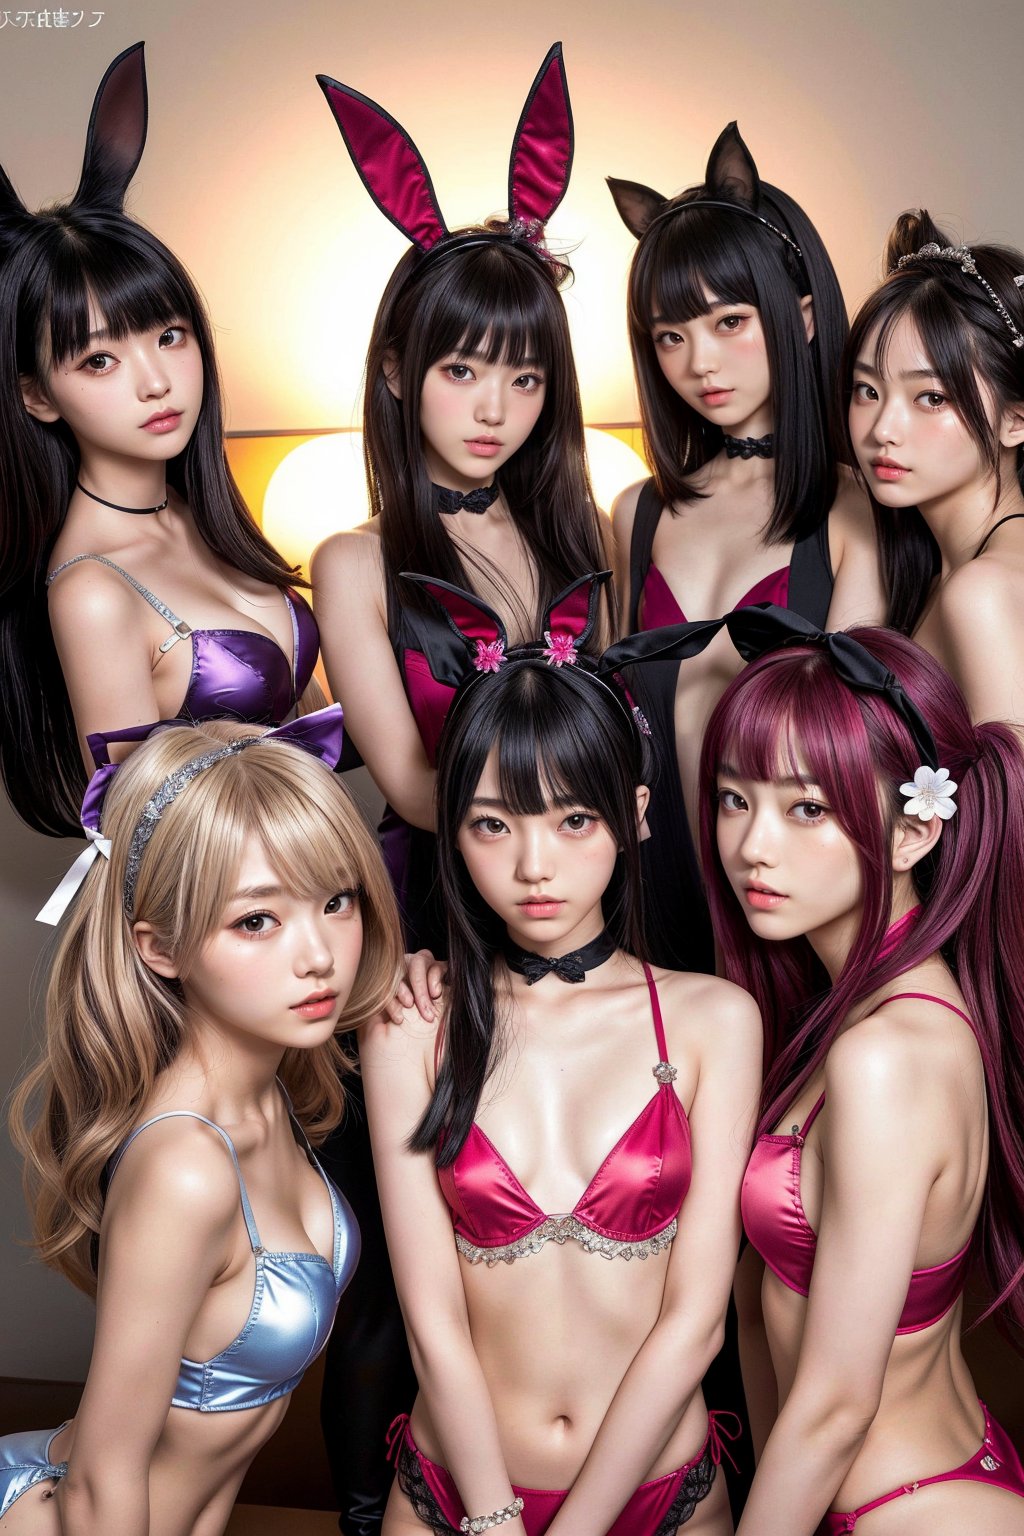 (Multiple slender Japanese super cute girls huddled together looking at the viewer,)High cut Playboy bunny  outfits, random hair, various hair ornaments, various accessories, various female focus, makeup, parody, (6+ girls), realistic, various faces, various hair colors, various eye colors, various ages, (various boob sizes,)All slender, skinny、Playboy Bunny,